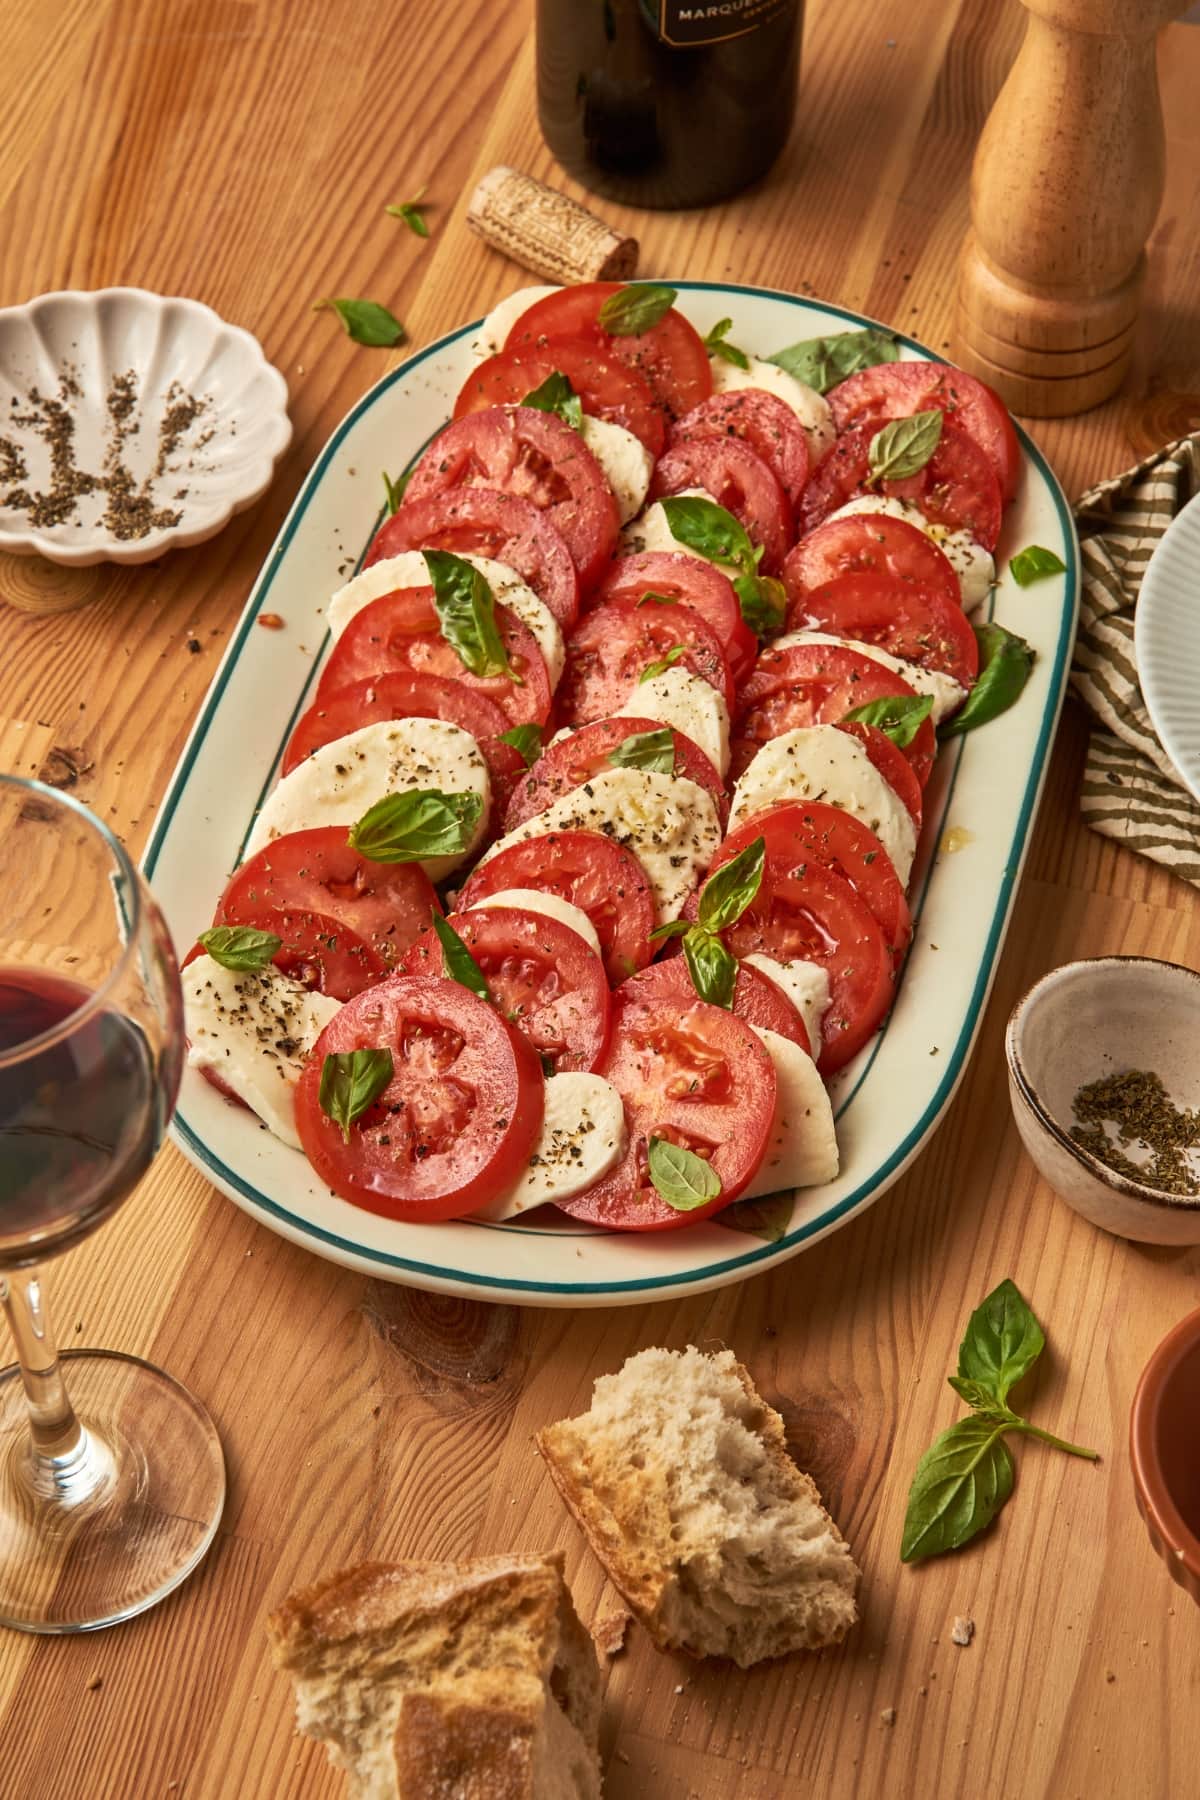 oval plate with caprese salad. next to a glass of wine, bread, bottle of wine.